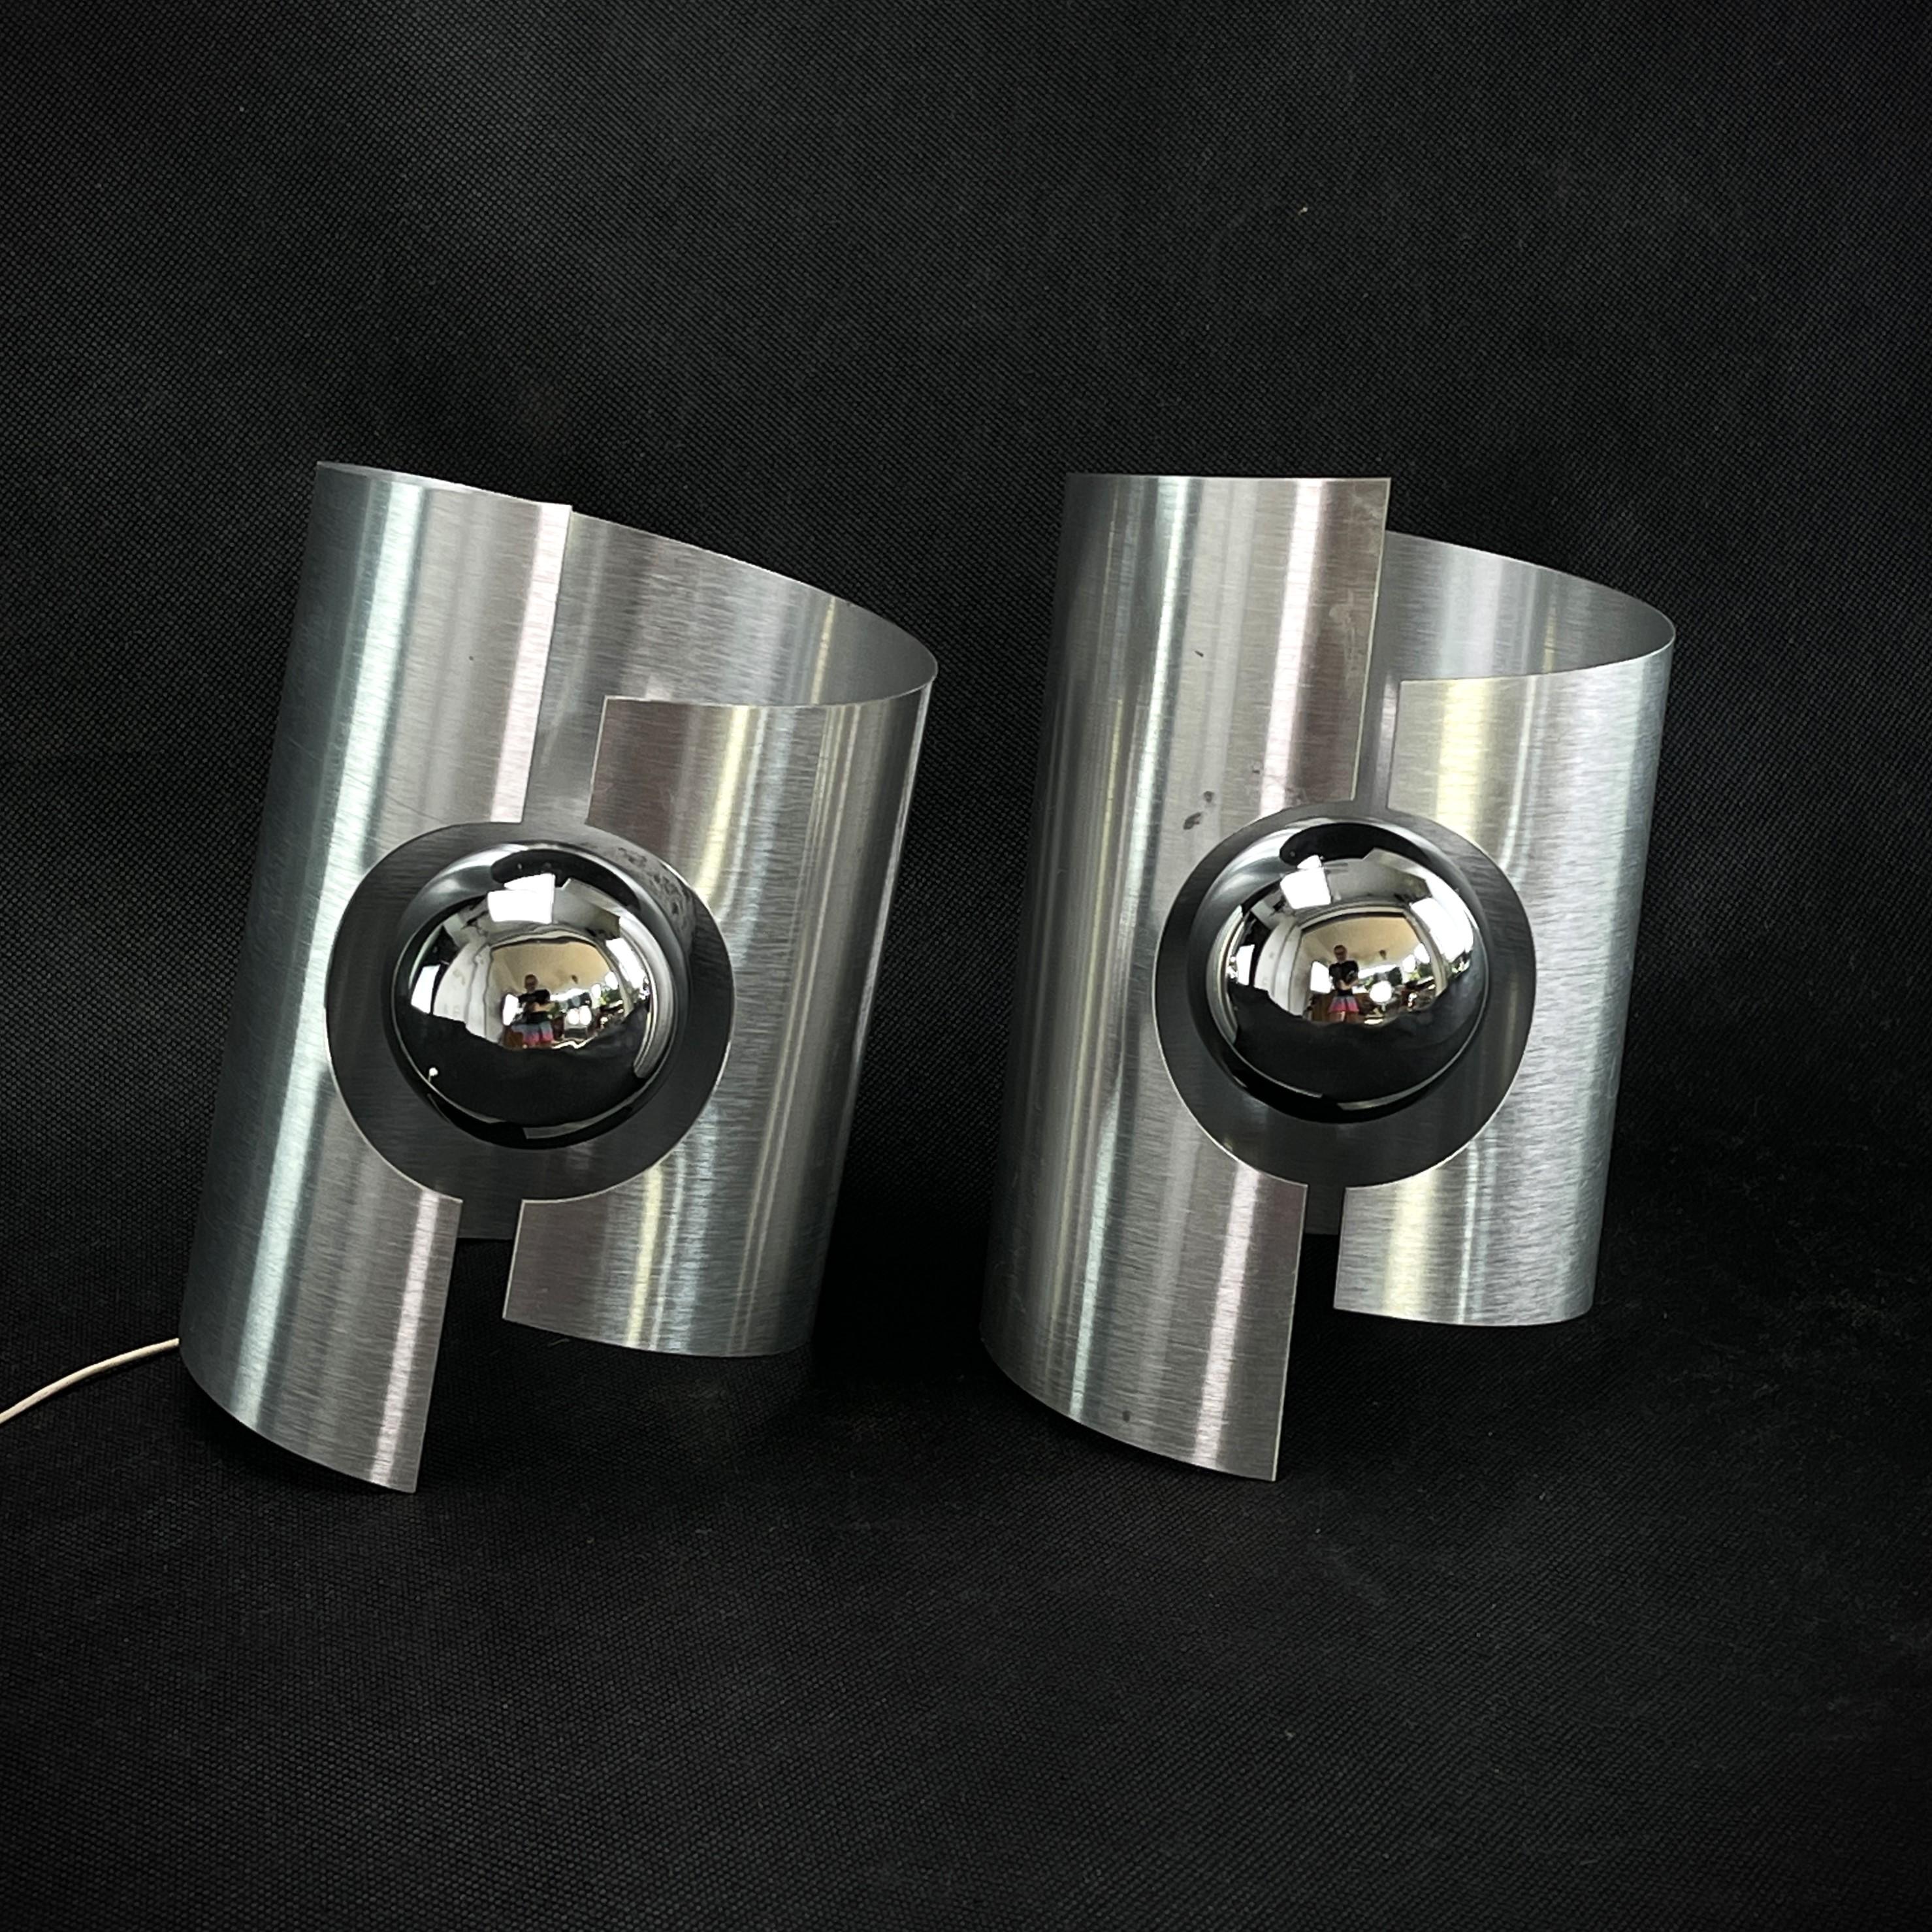 Set of 2 x Aluminium Wall Lamps - 1970s

These great lamps are a real design classic from the 1960s-1970s. The wall lamps are an original of their time and provide a pleasant light. 
Overall, these two, silver lamps are a beautiful and timeless